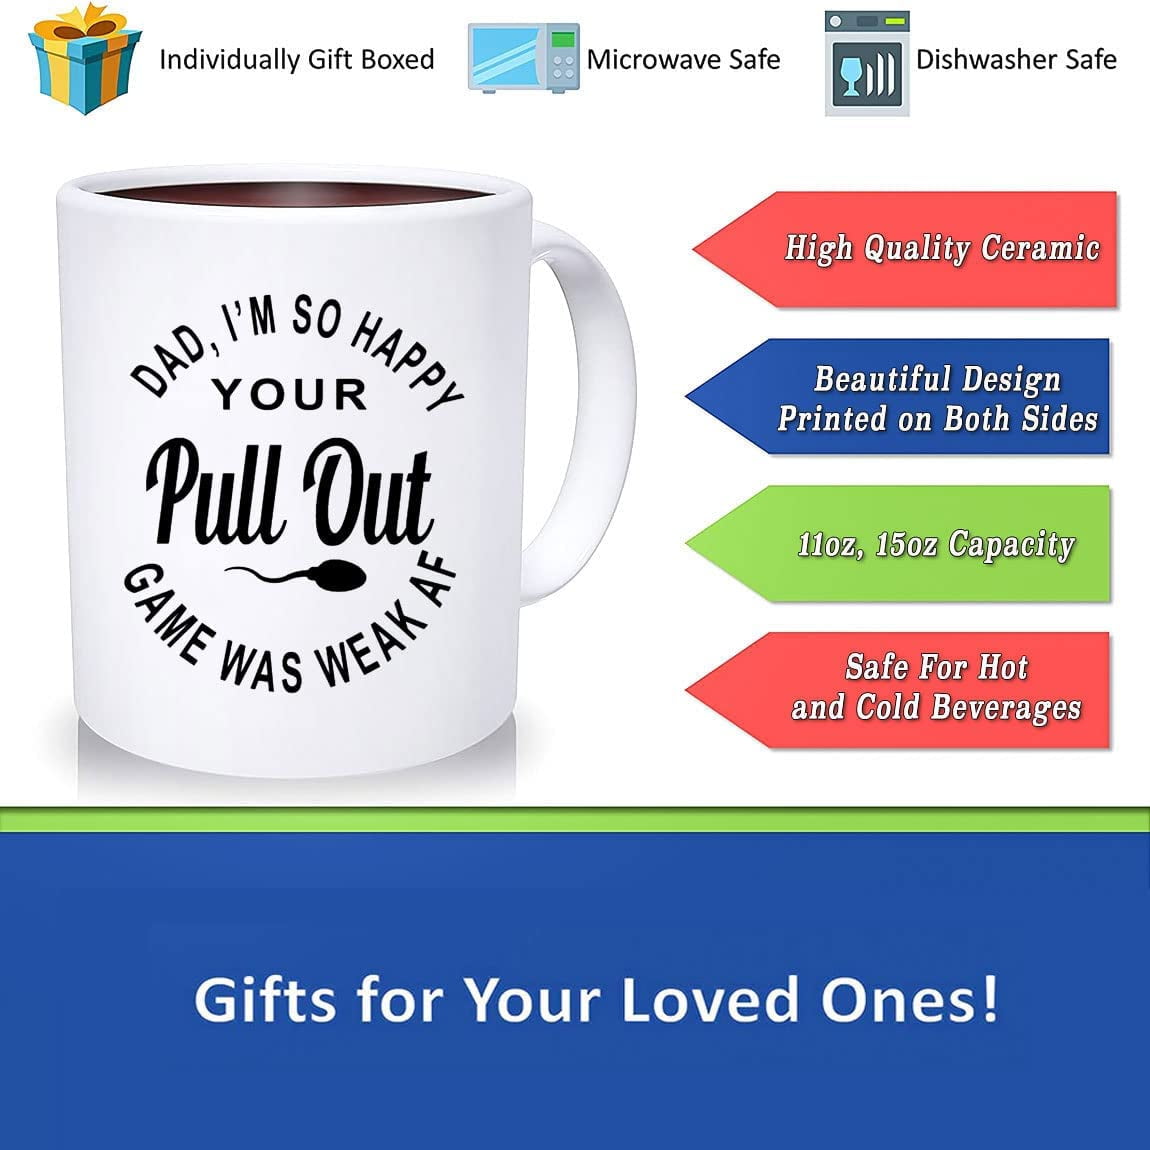 Gym Dad Like A Normal Dad - Personalized Fitness Mug for Dad and Fitne —  GearLit